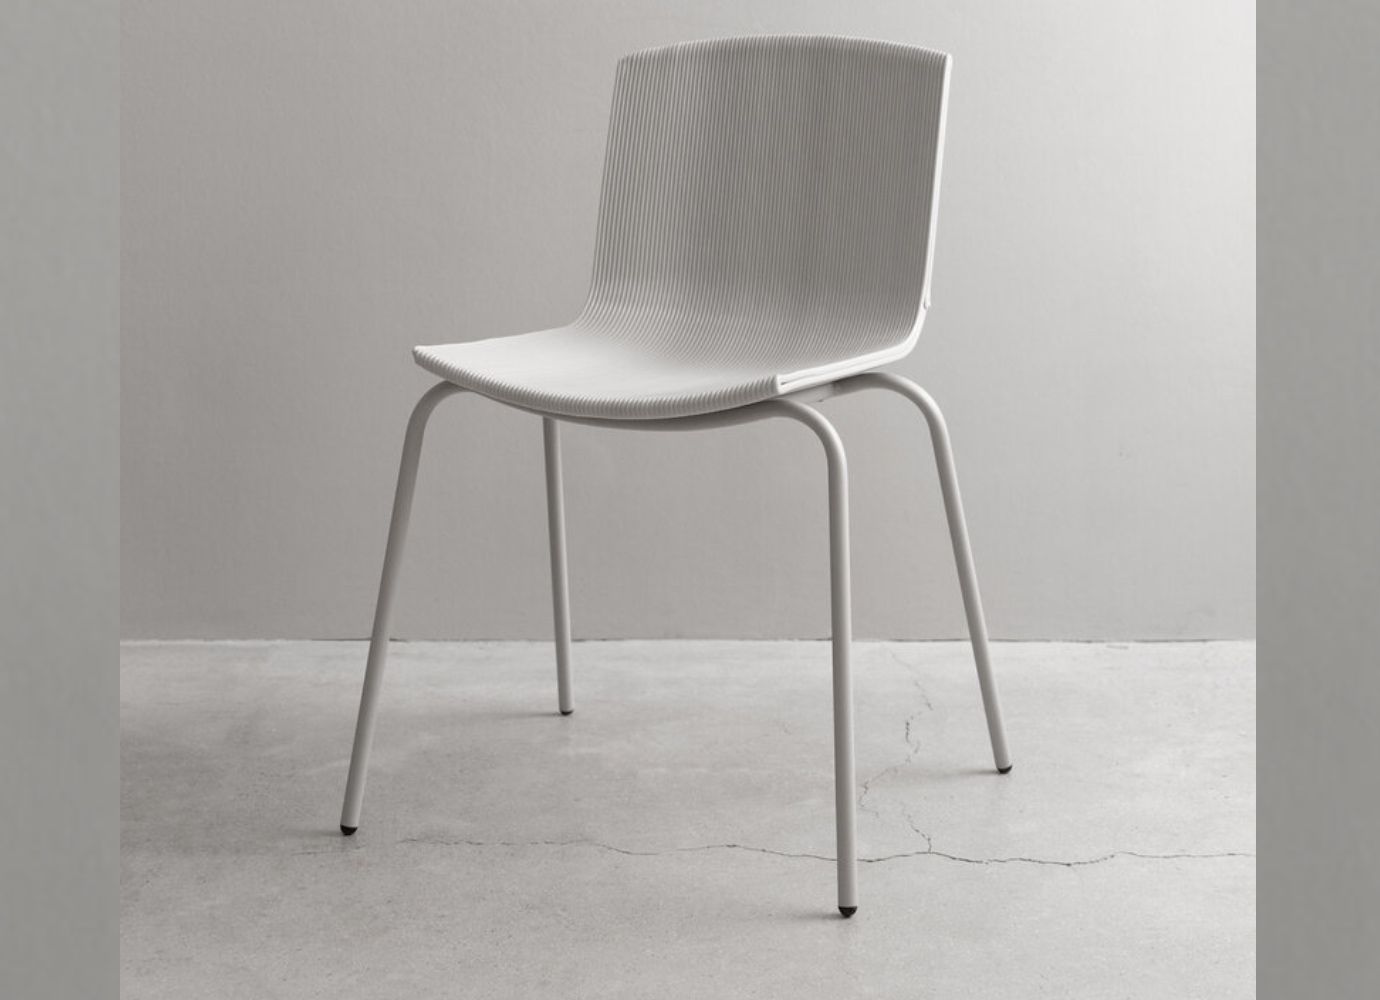 Exciting and sustainable—chairs made from yoghurt cups